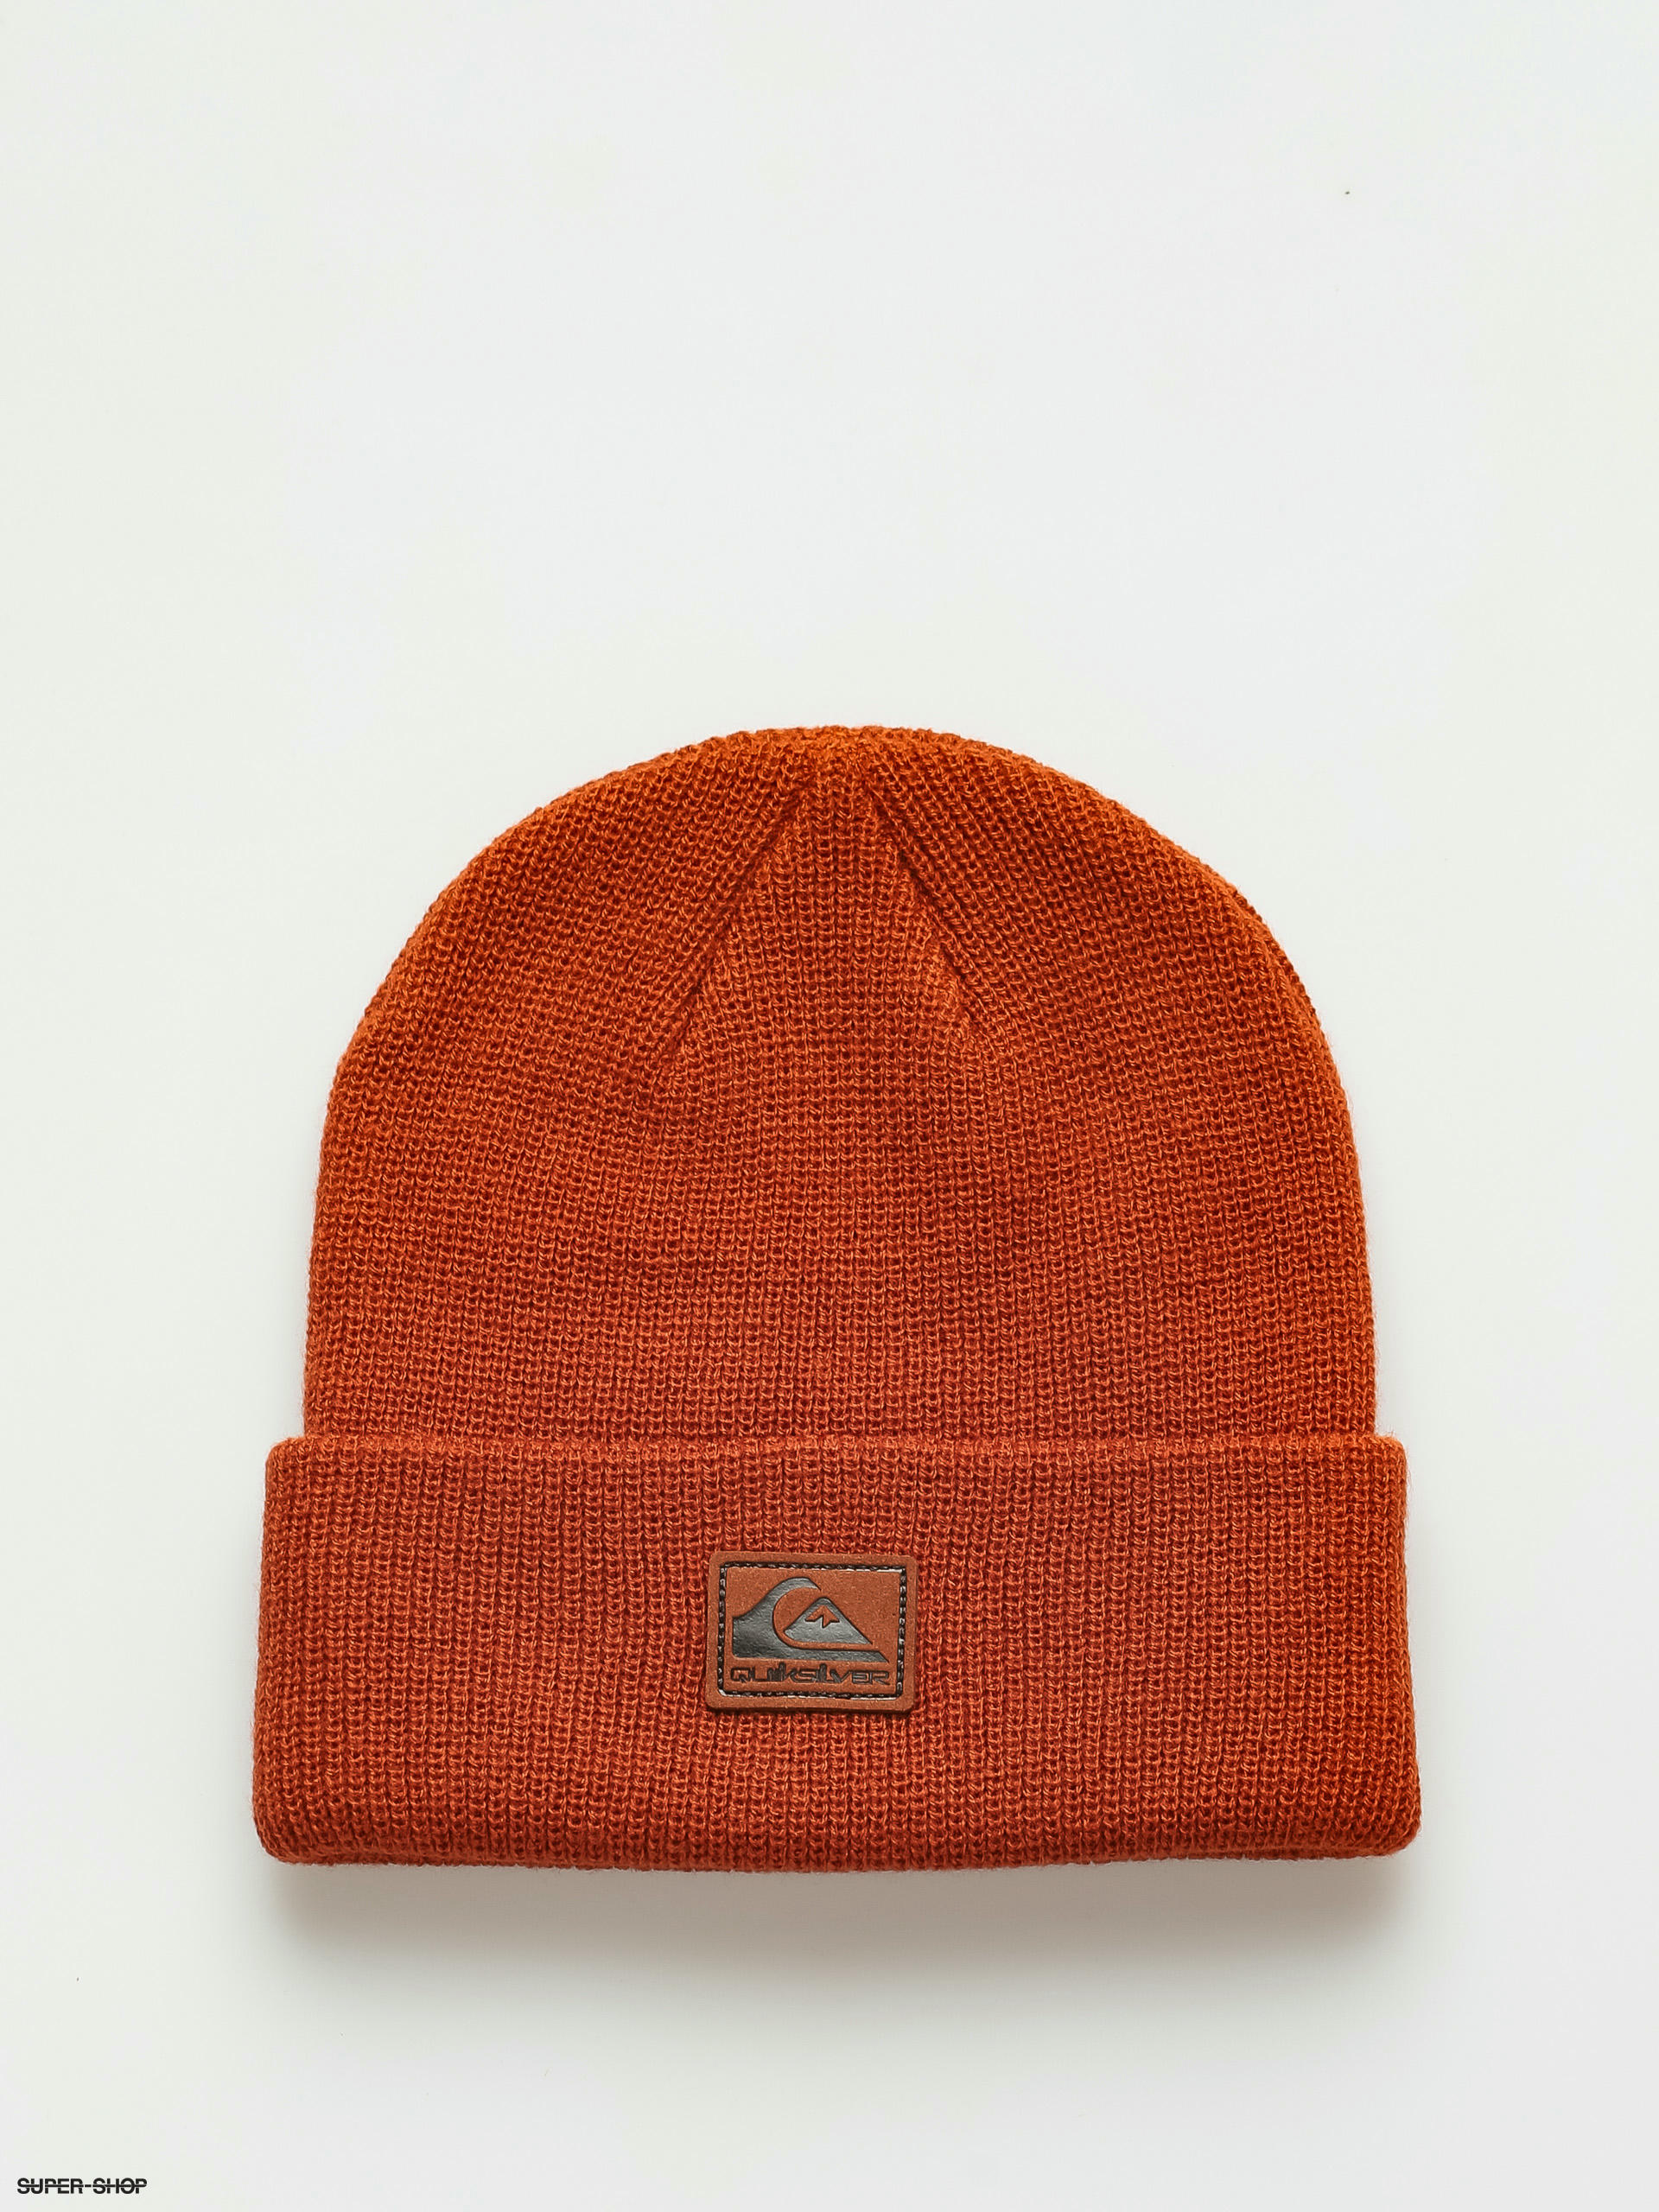 2 brown) Performer Beanie Quiksilver (bombay